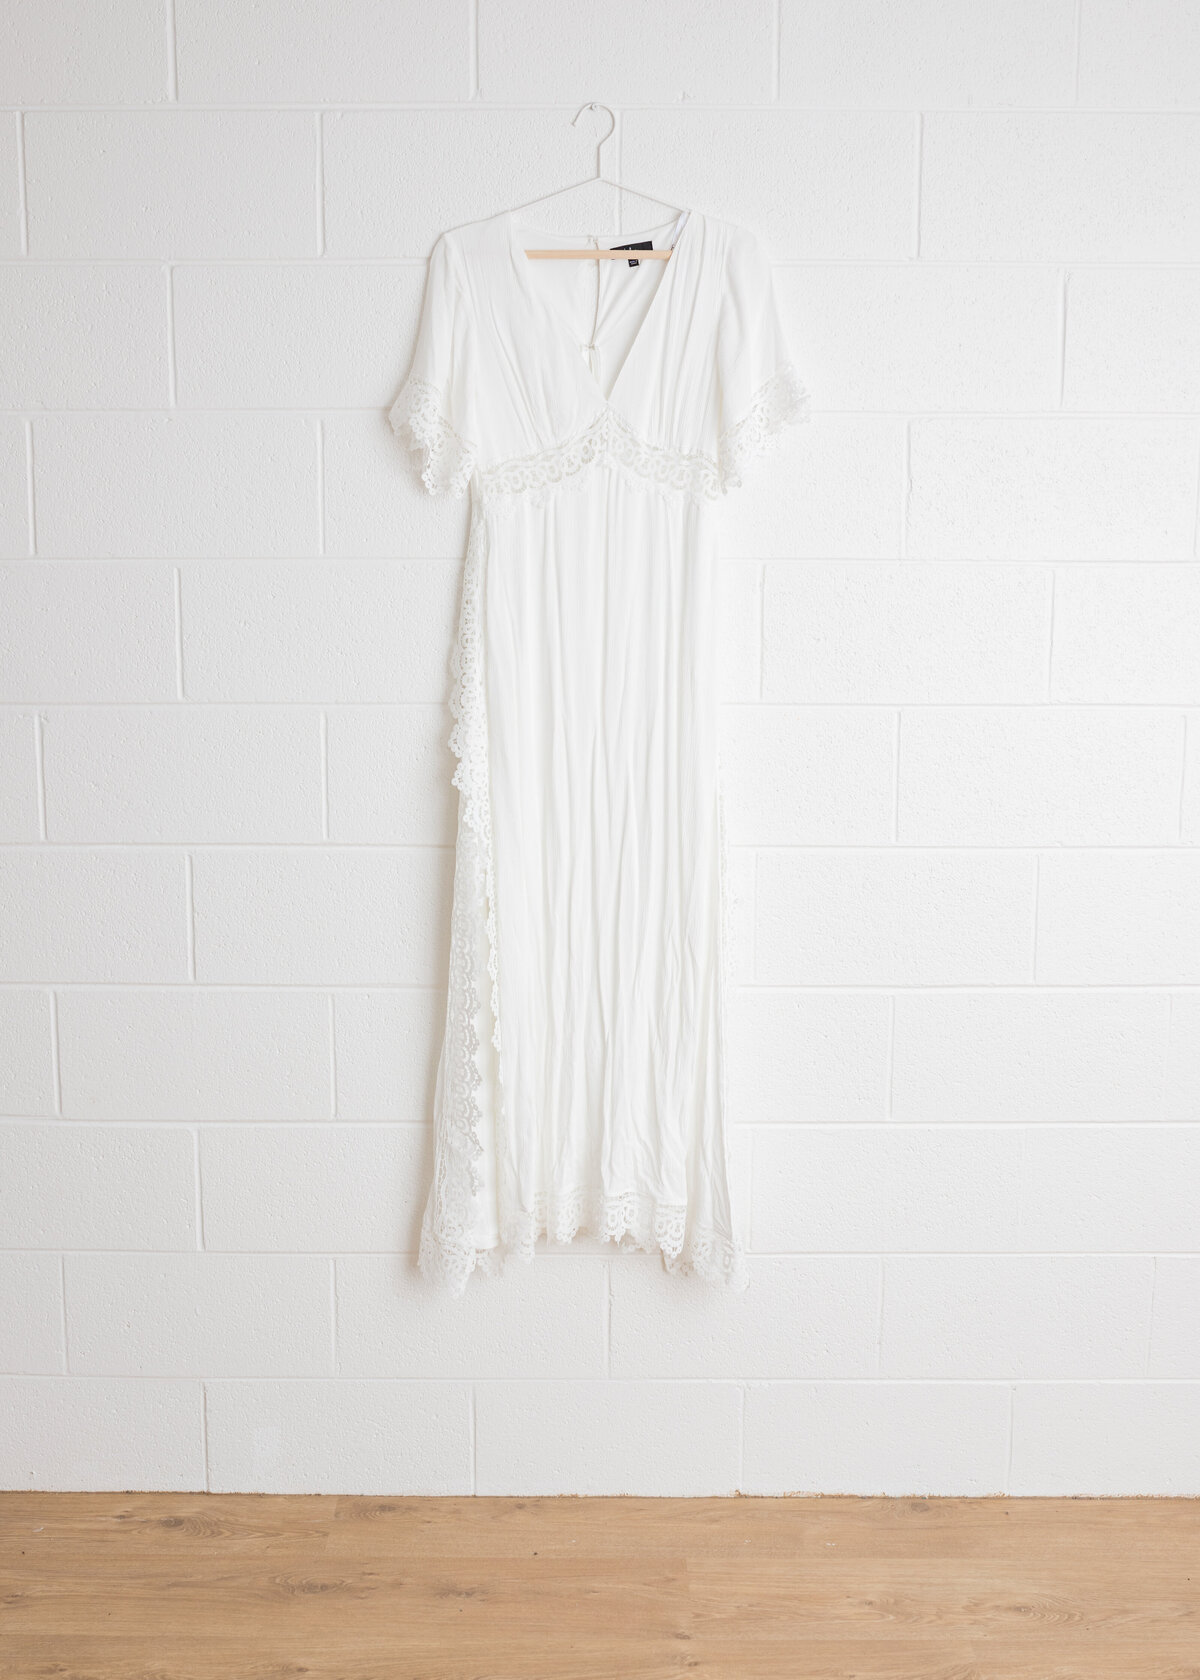 Lulu's Sweeten the Occasion Maxi Dress in White with lace trim, available in sies S - L in Lauren Vanier Photography's Hobart Studio Wardrobe